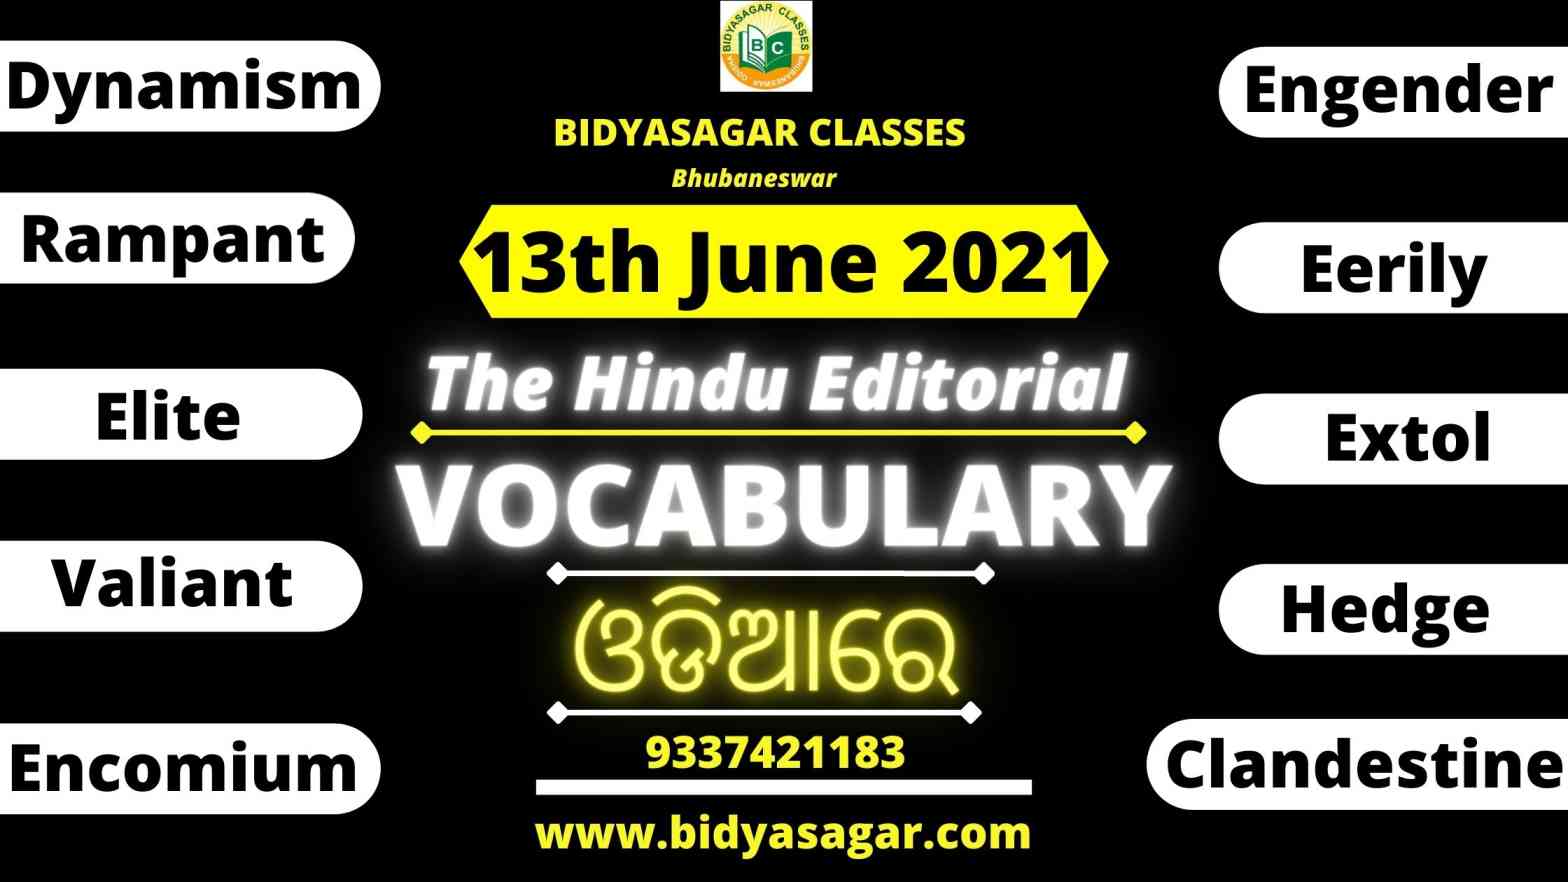 The Hindu Editorial Vocabulary of 13th June 2021